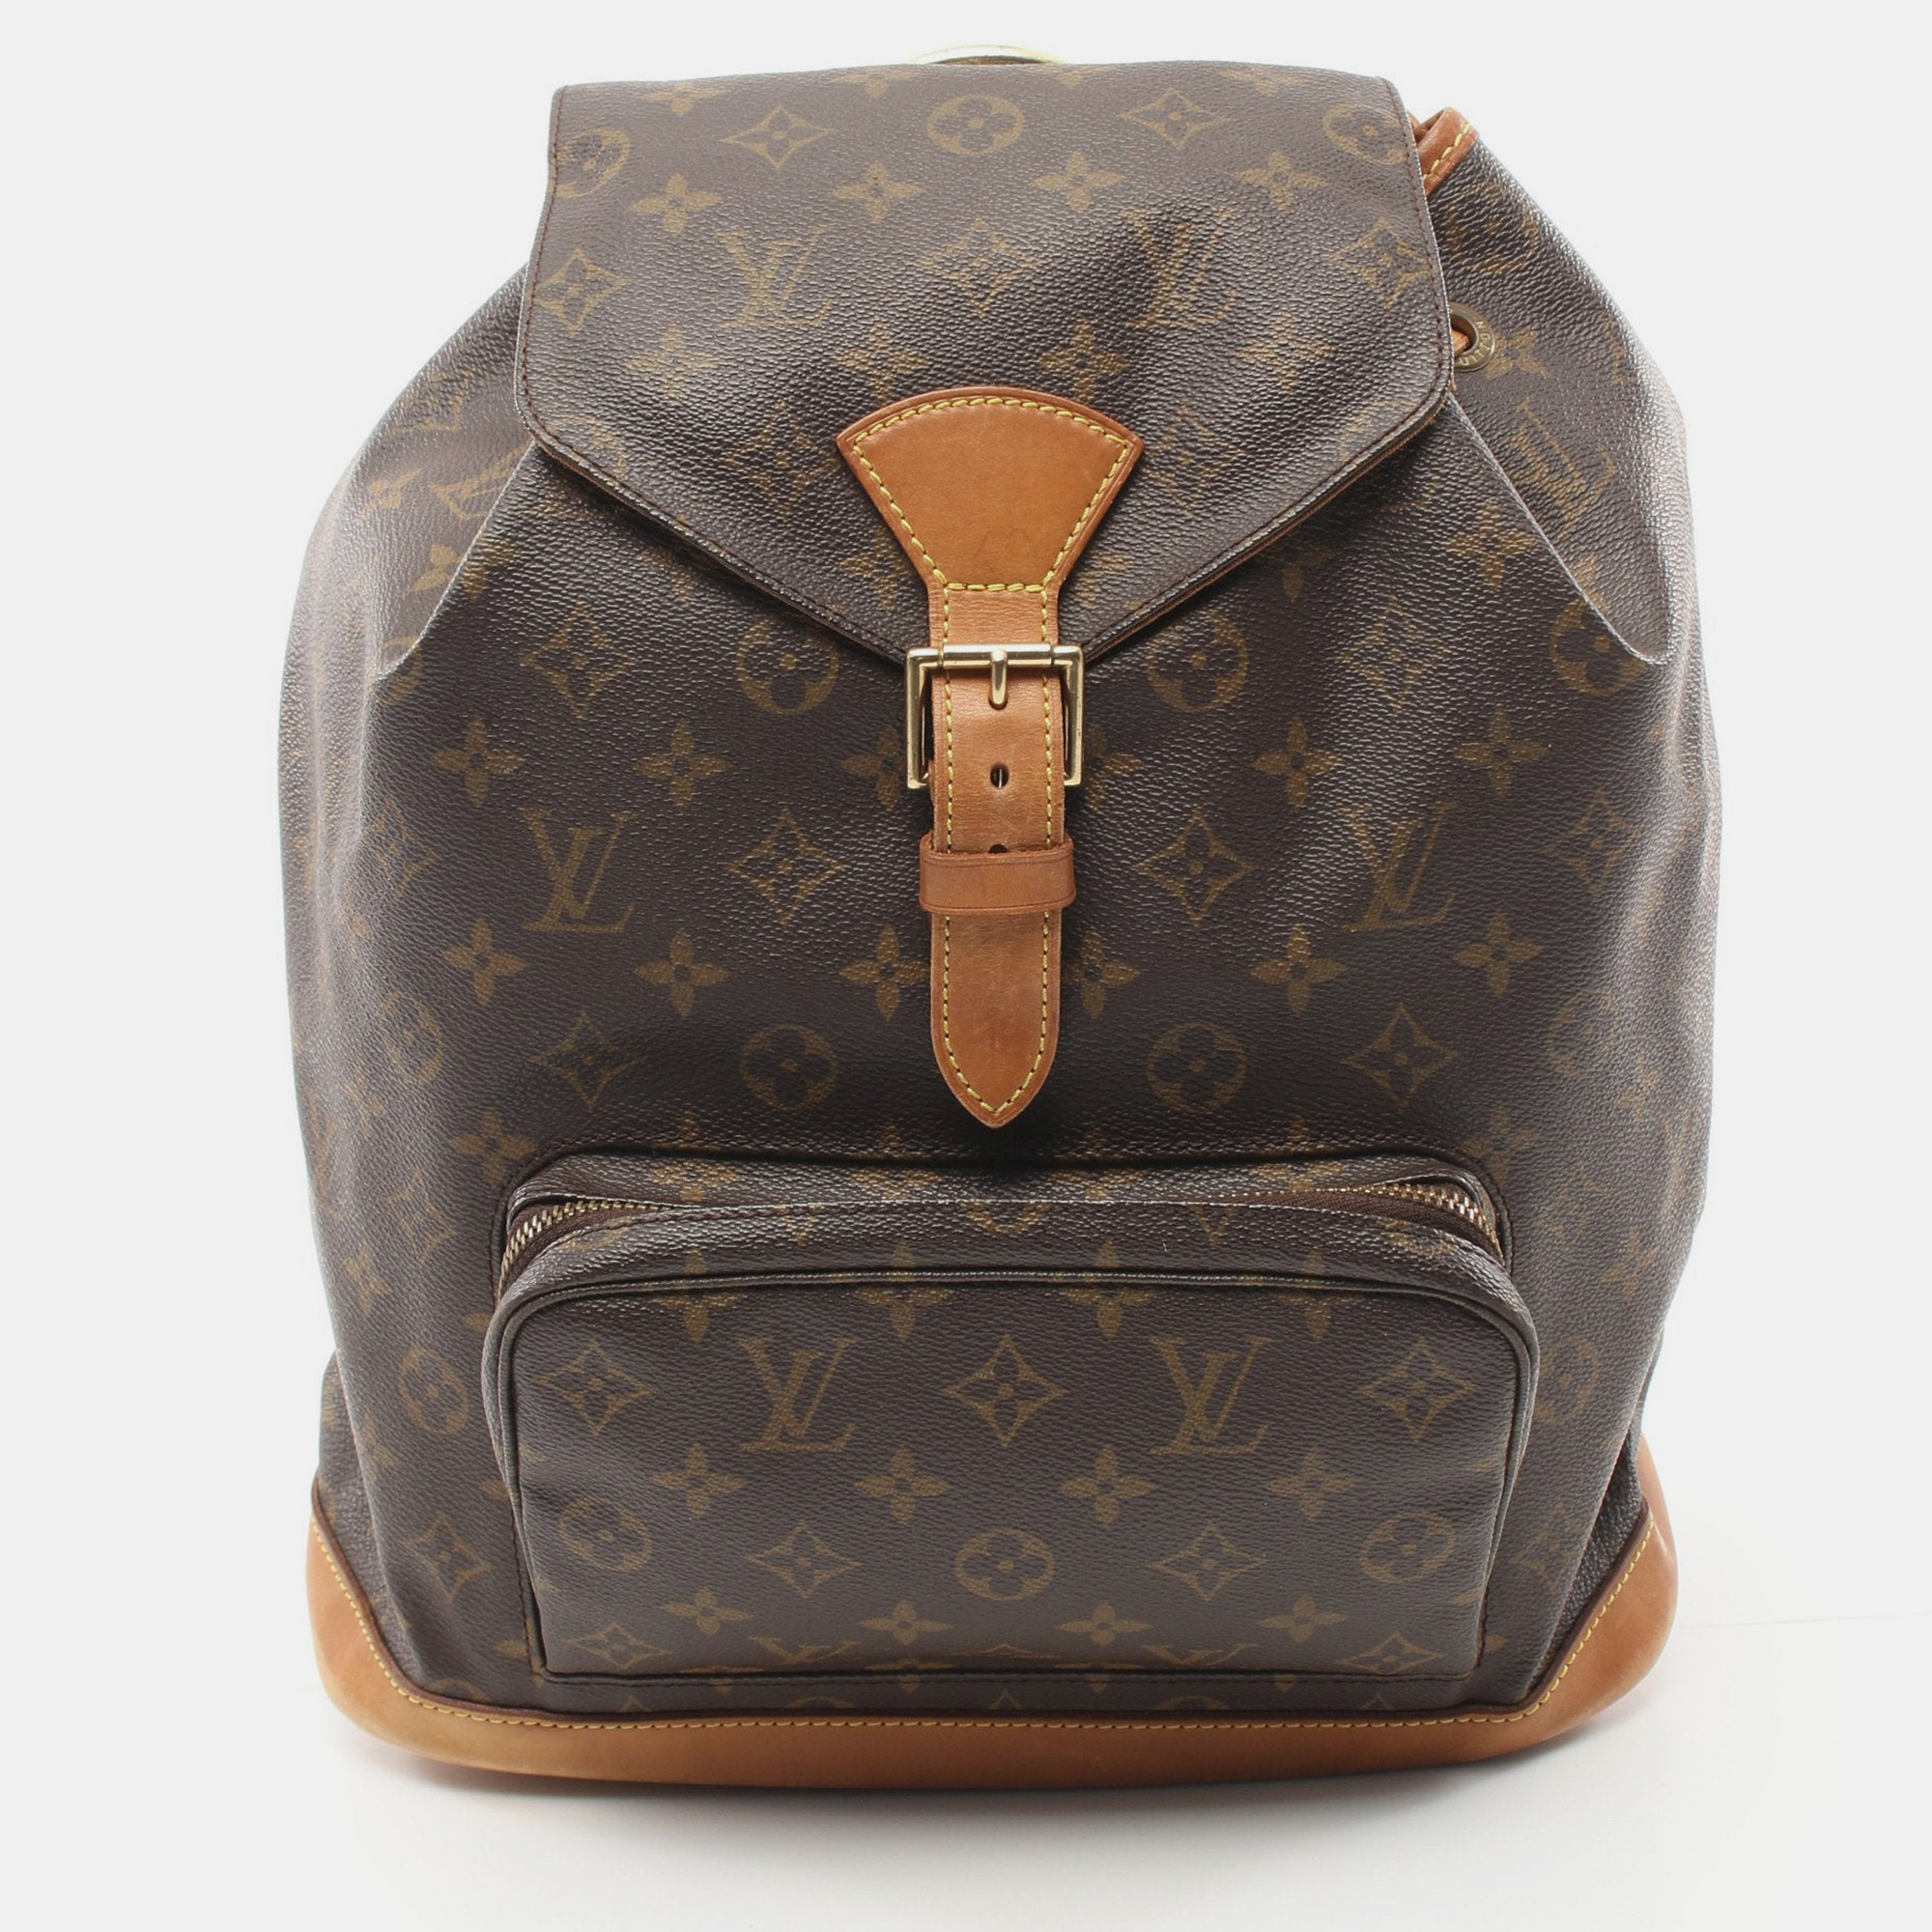 Pre-owned Louis Vuitton Montsouris Gm Monogram Backpack Rucksack Pvc Leather Brown